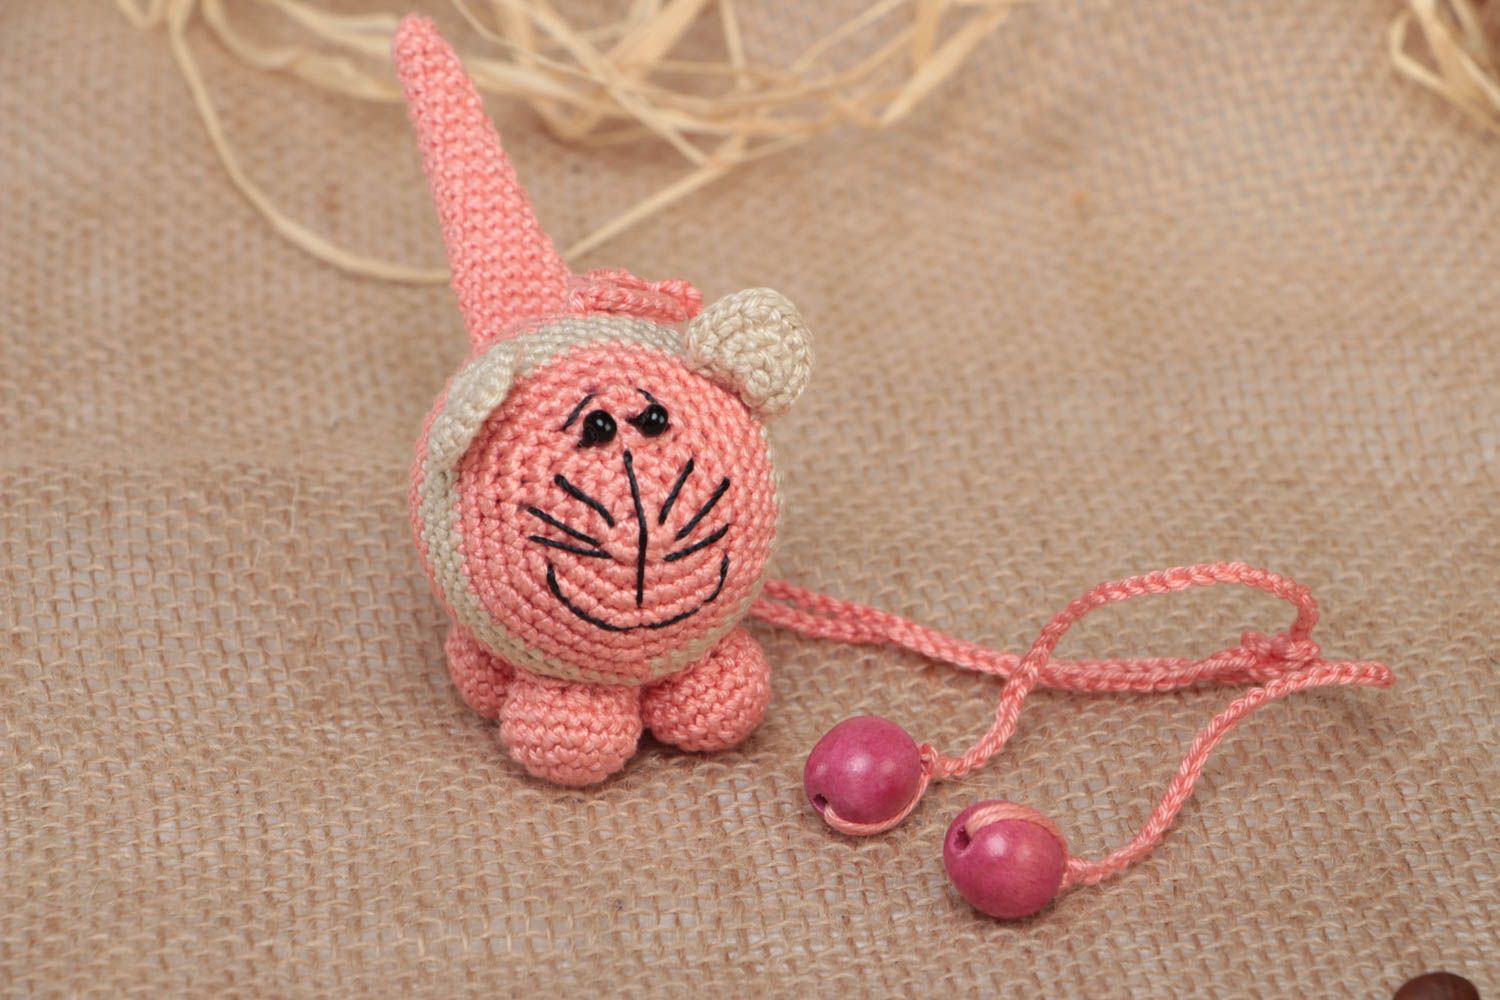 Crocheted cotton rattle small pink cat handmade toy for children and nursery photo 1